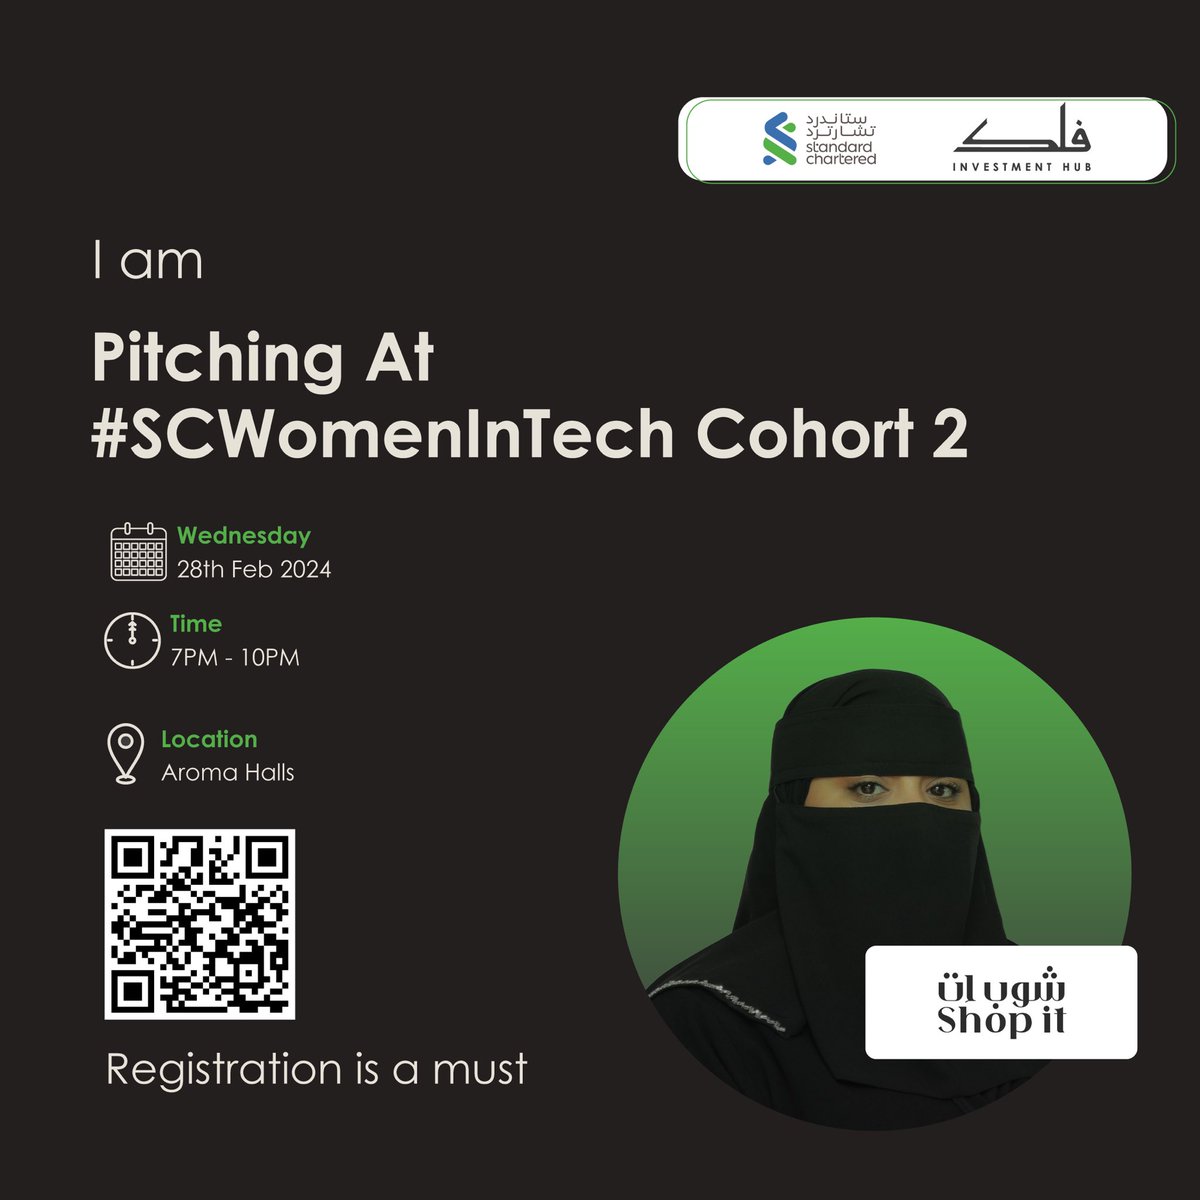 Keep an eye on your girl as I AM PITCHING AT #SCWOMENINTECH COHORT 2 & ready to shape the future of technology in the region. 
@Falak_Hub #FalakWIT #StandardChartered